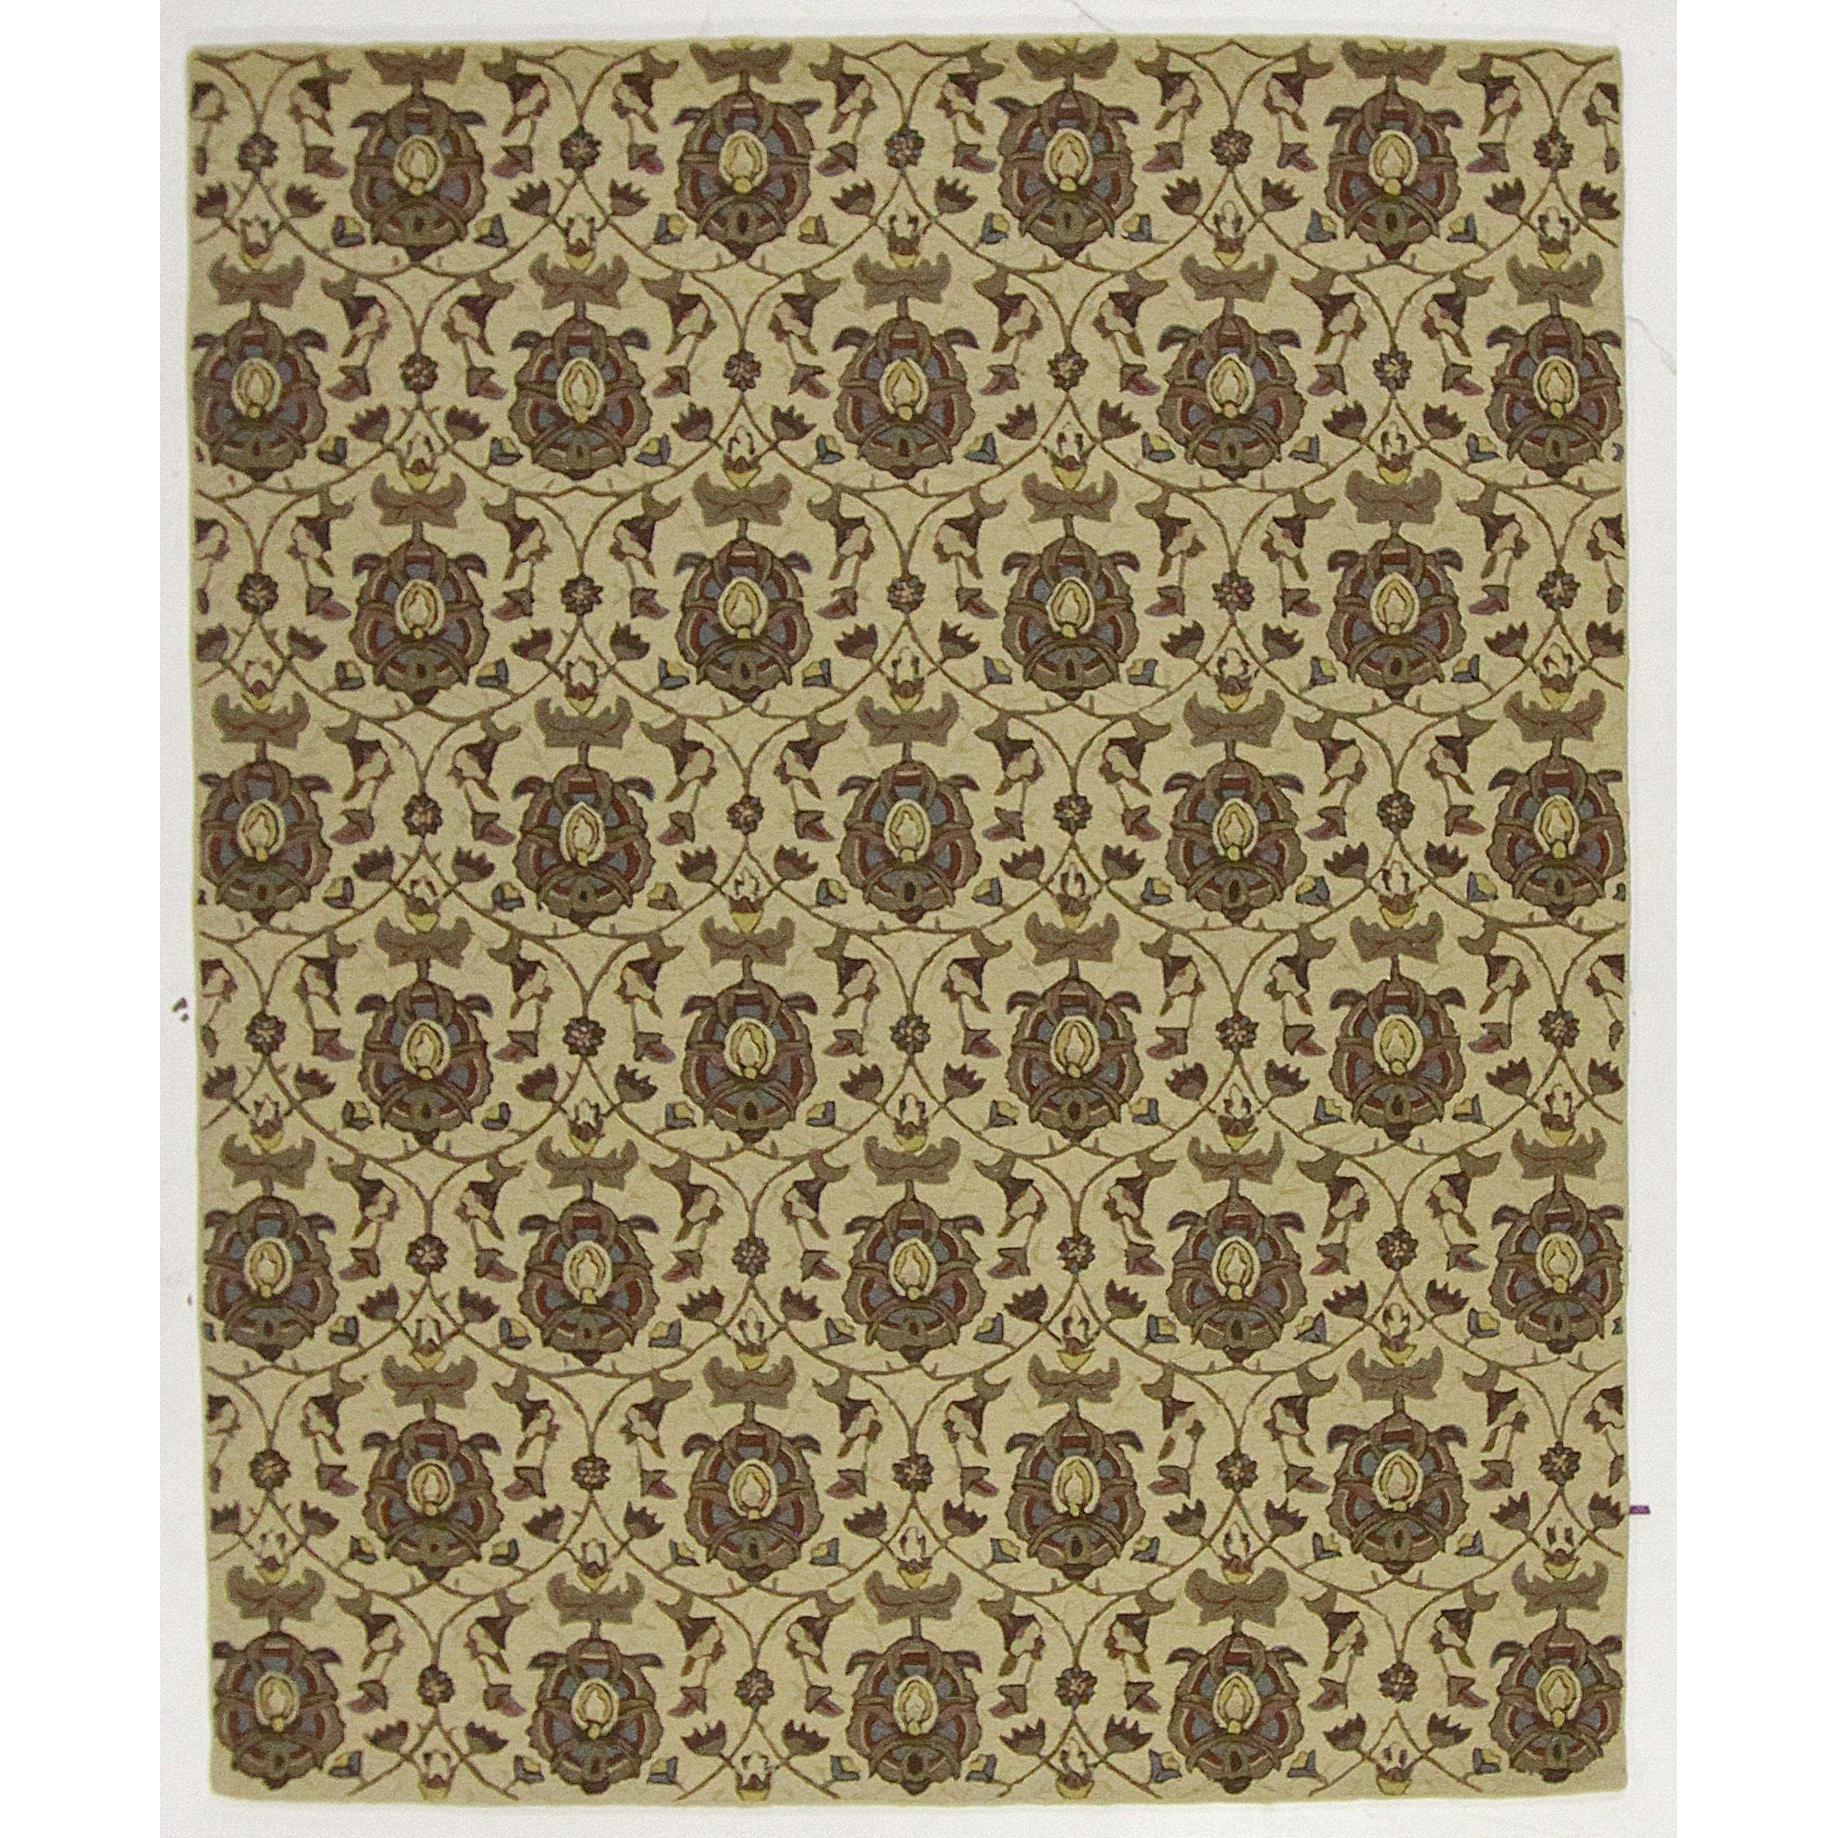 Hand tufted Transitional Ivory/ Multi Wool Rug (5 X 8)